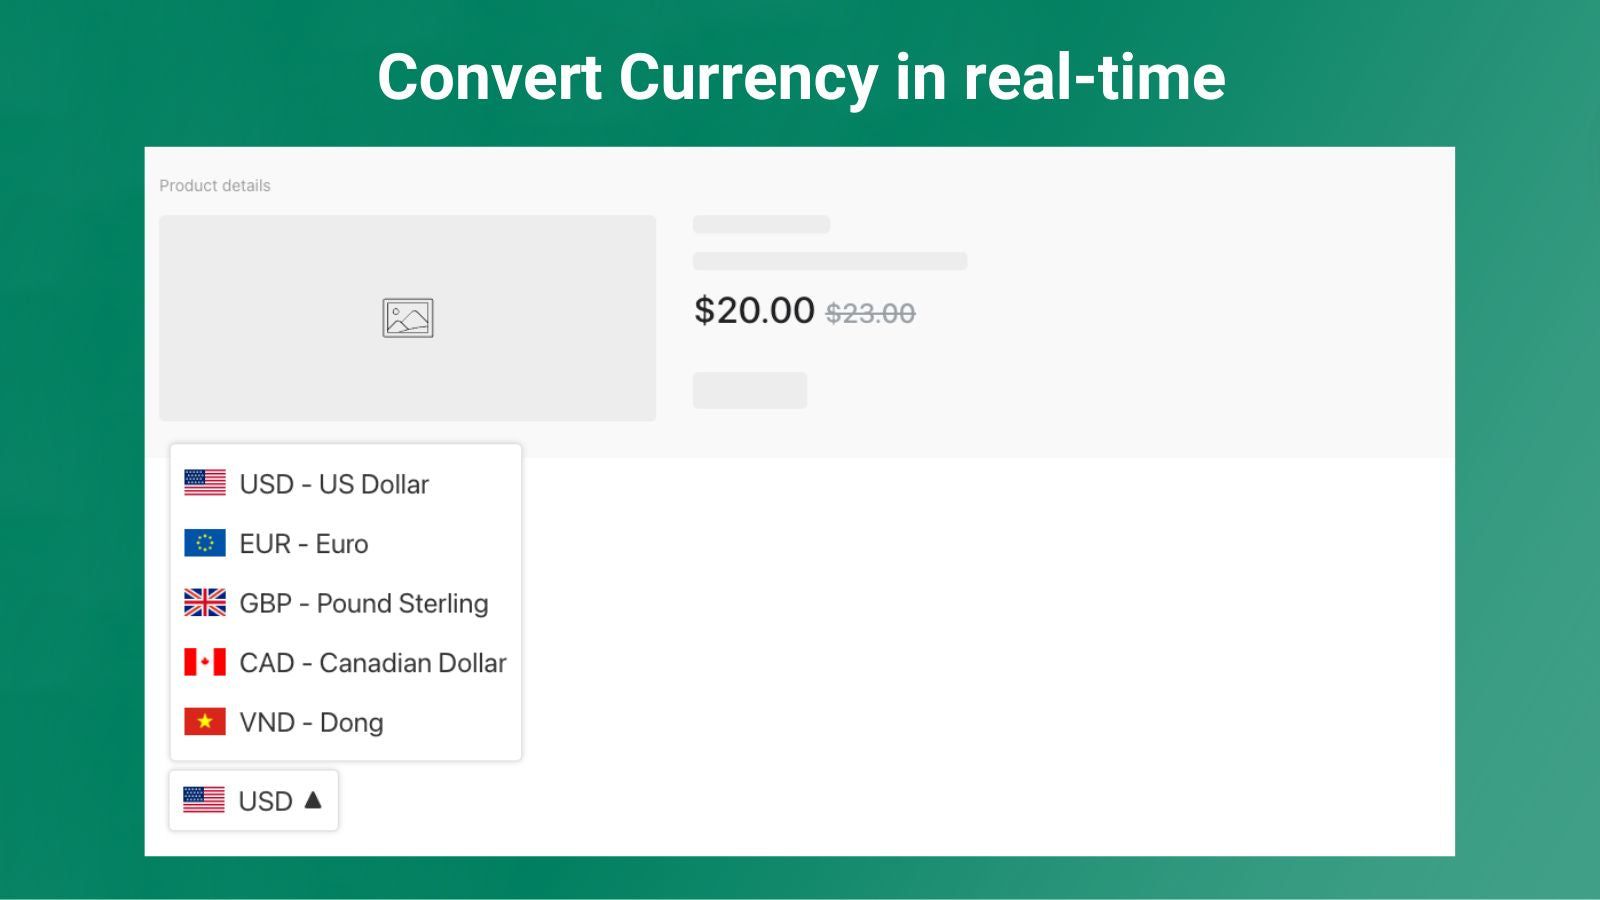 Convert currency in real-time